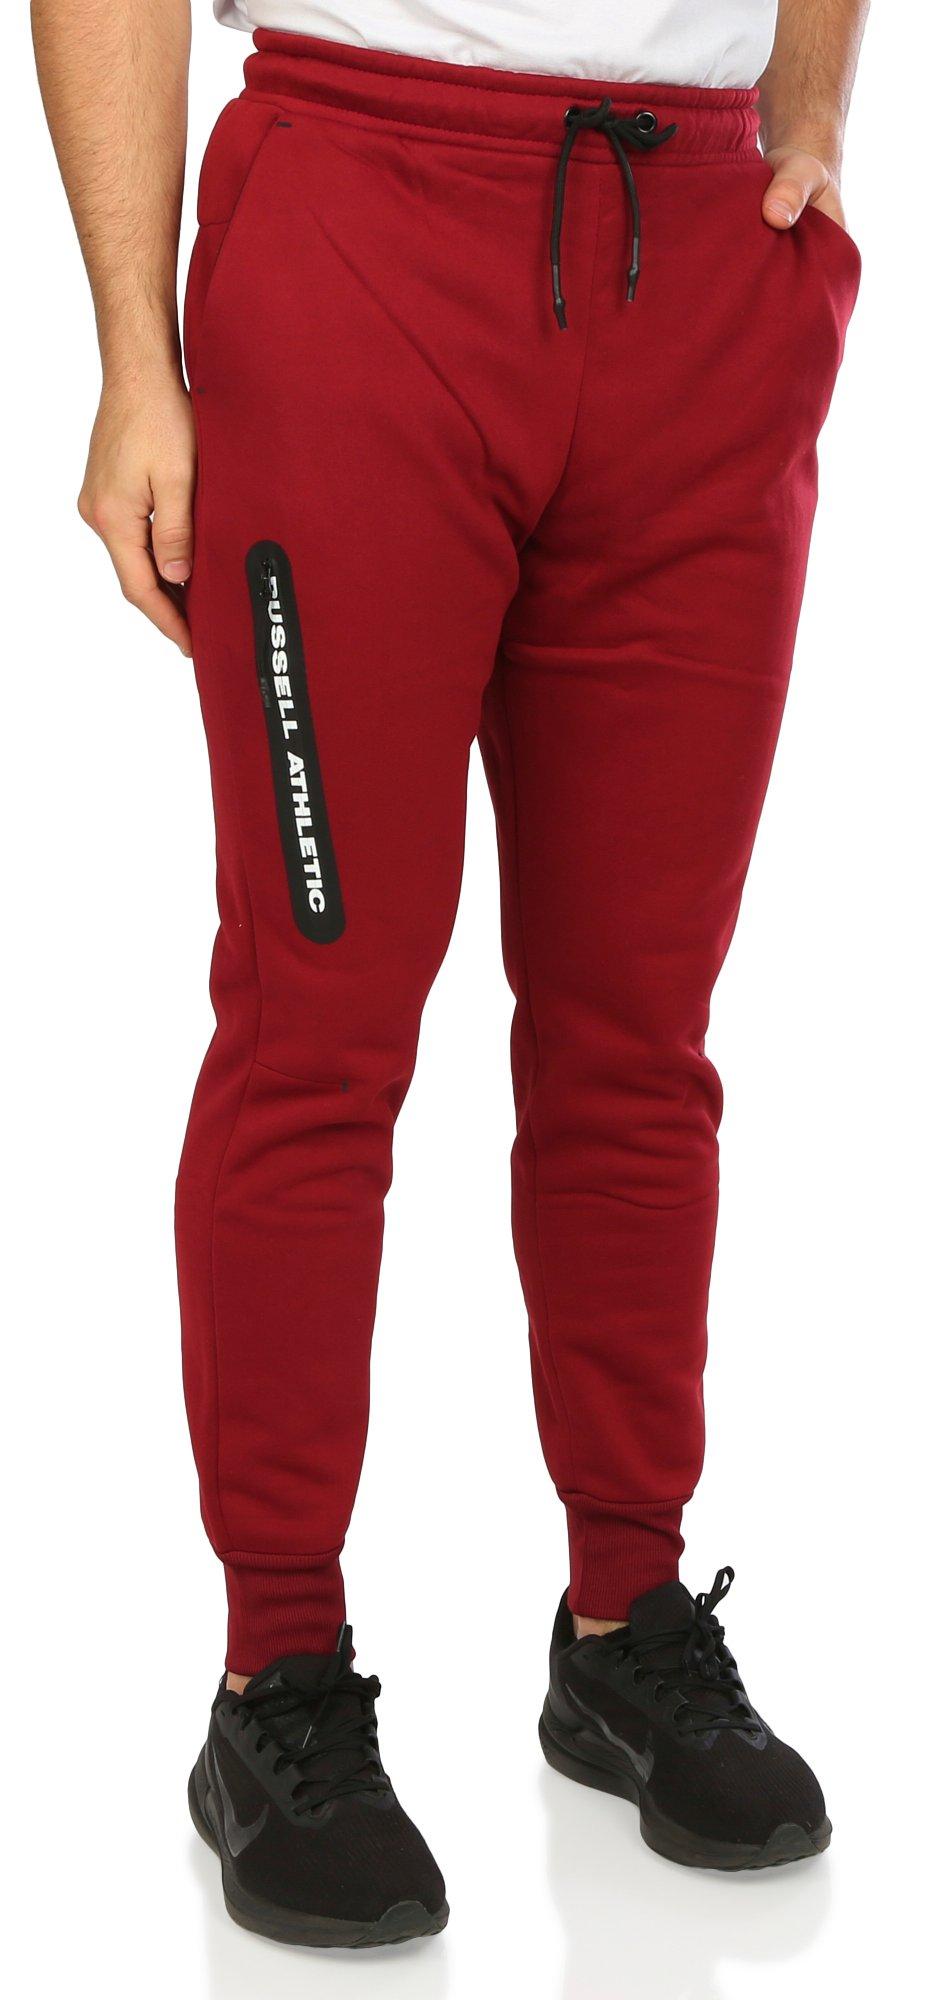 Men's Active Heathered Joggers - Red